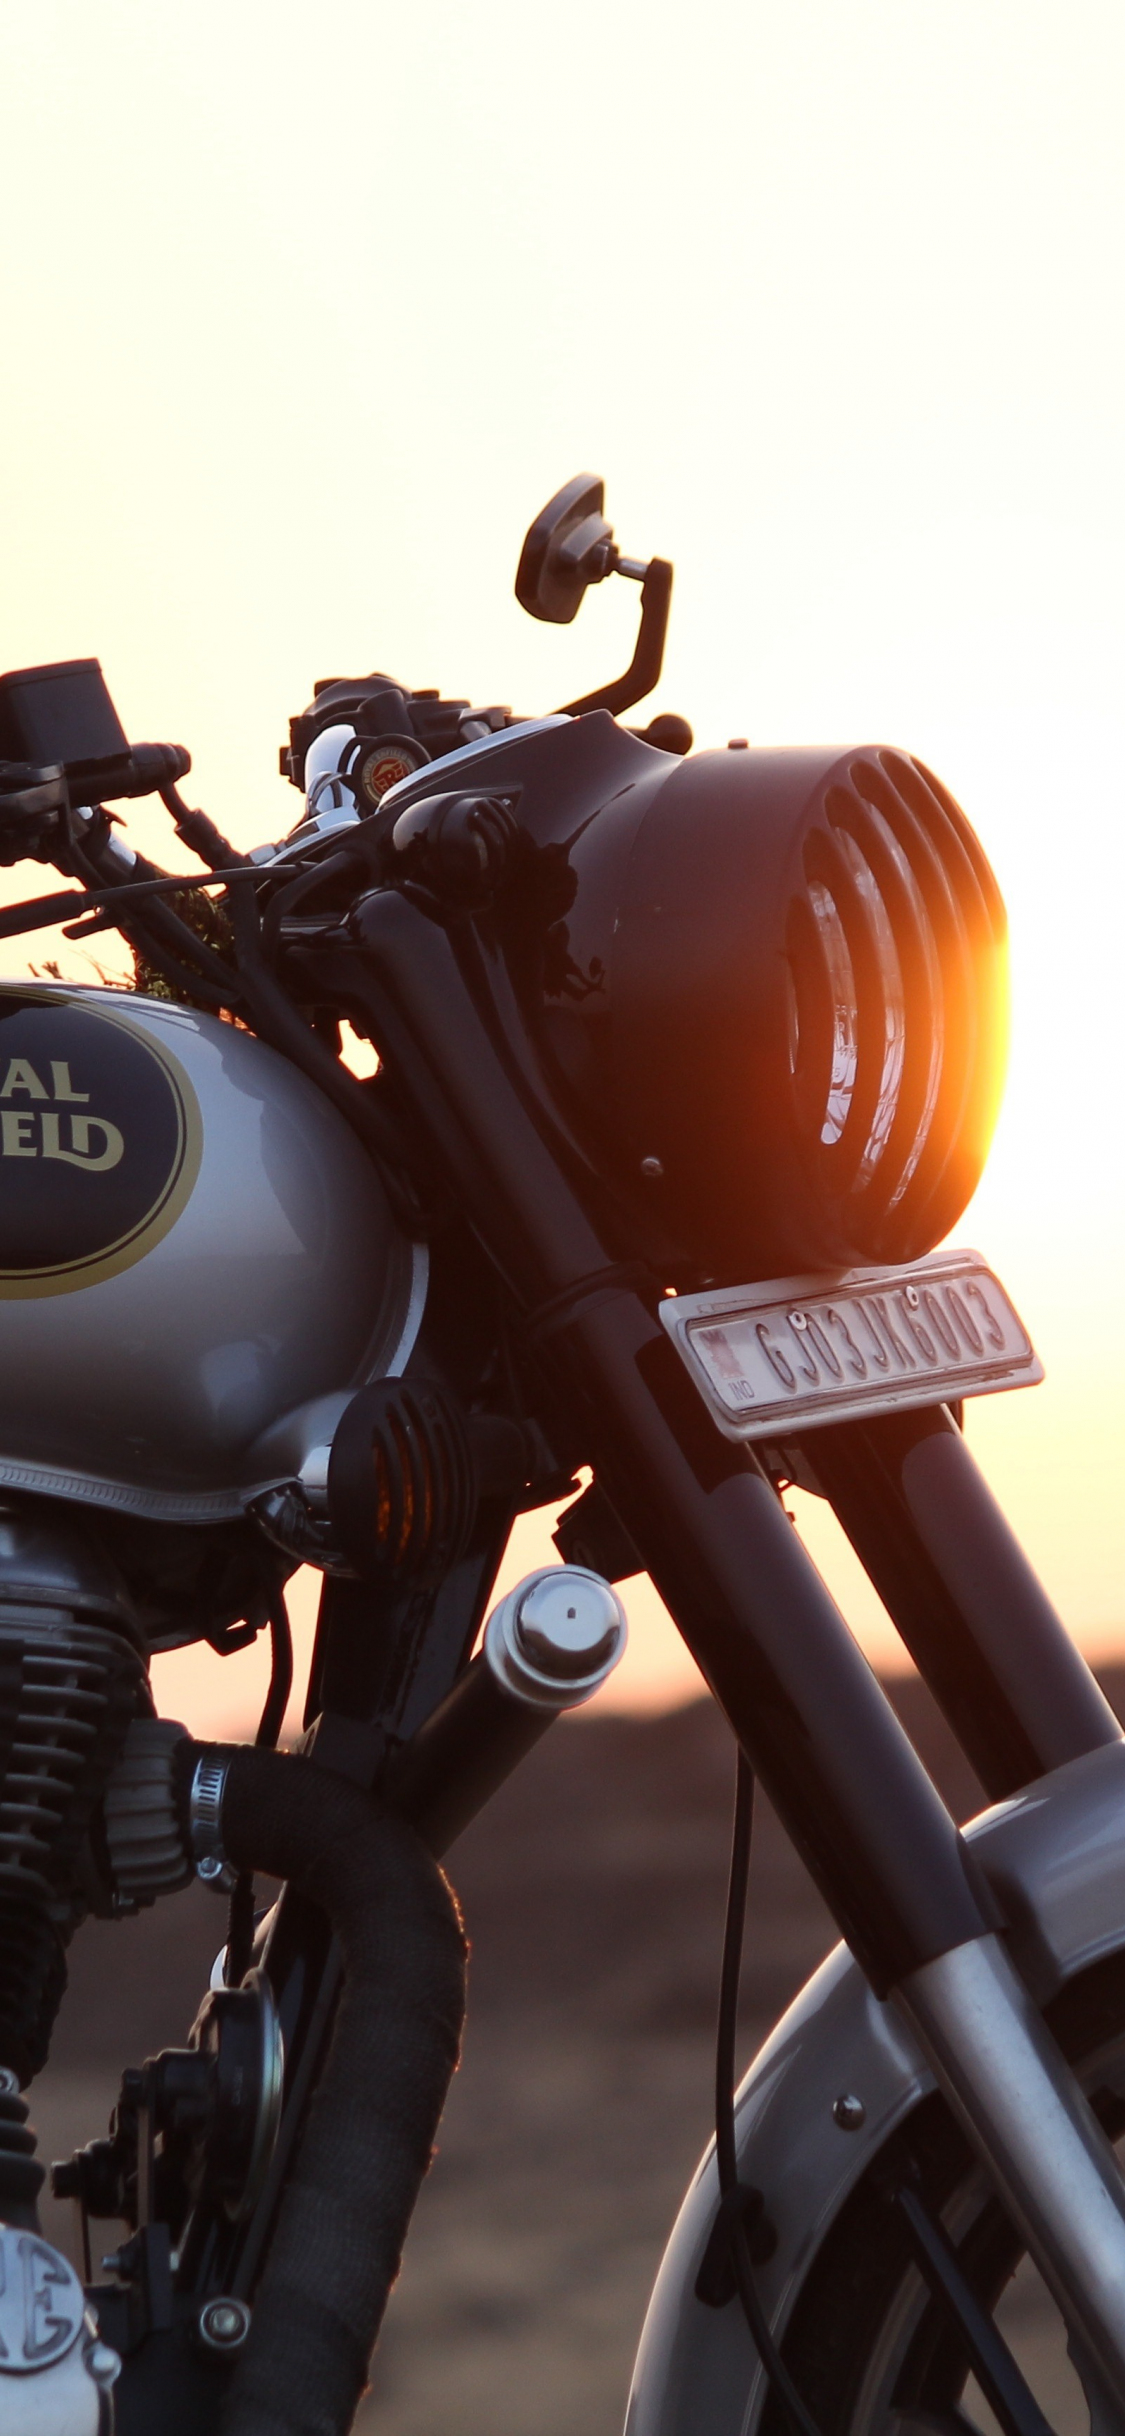 Royal Enfield Hd Wallpapers For Mobile Download